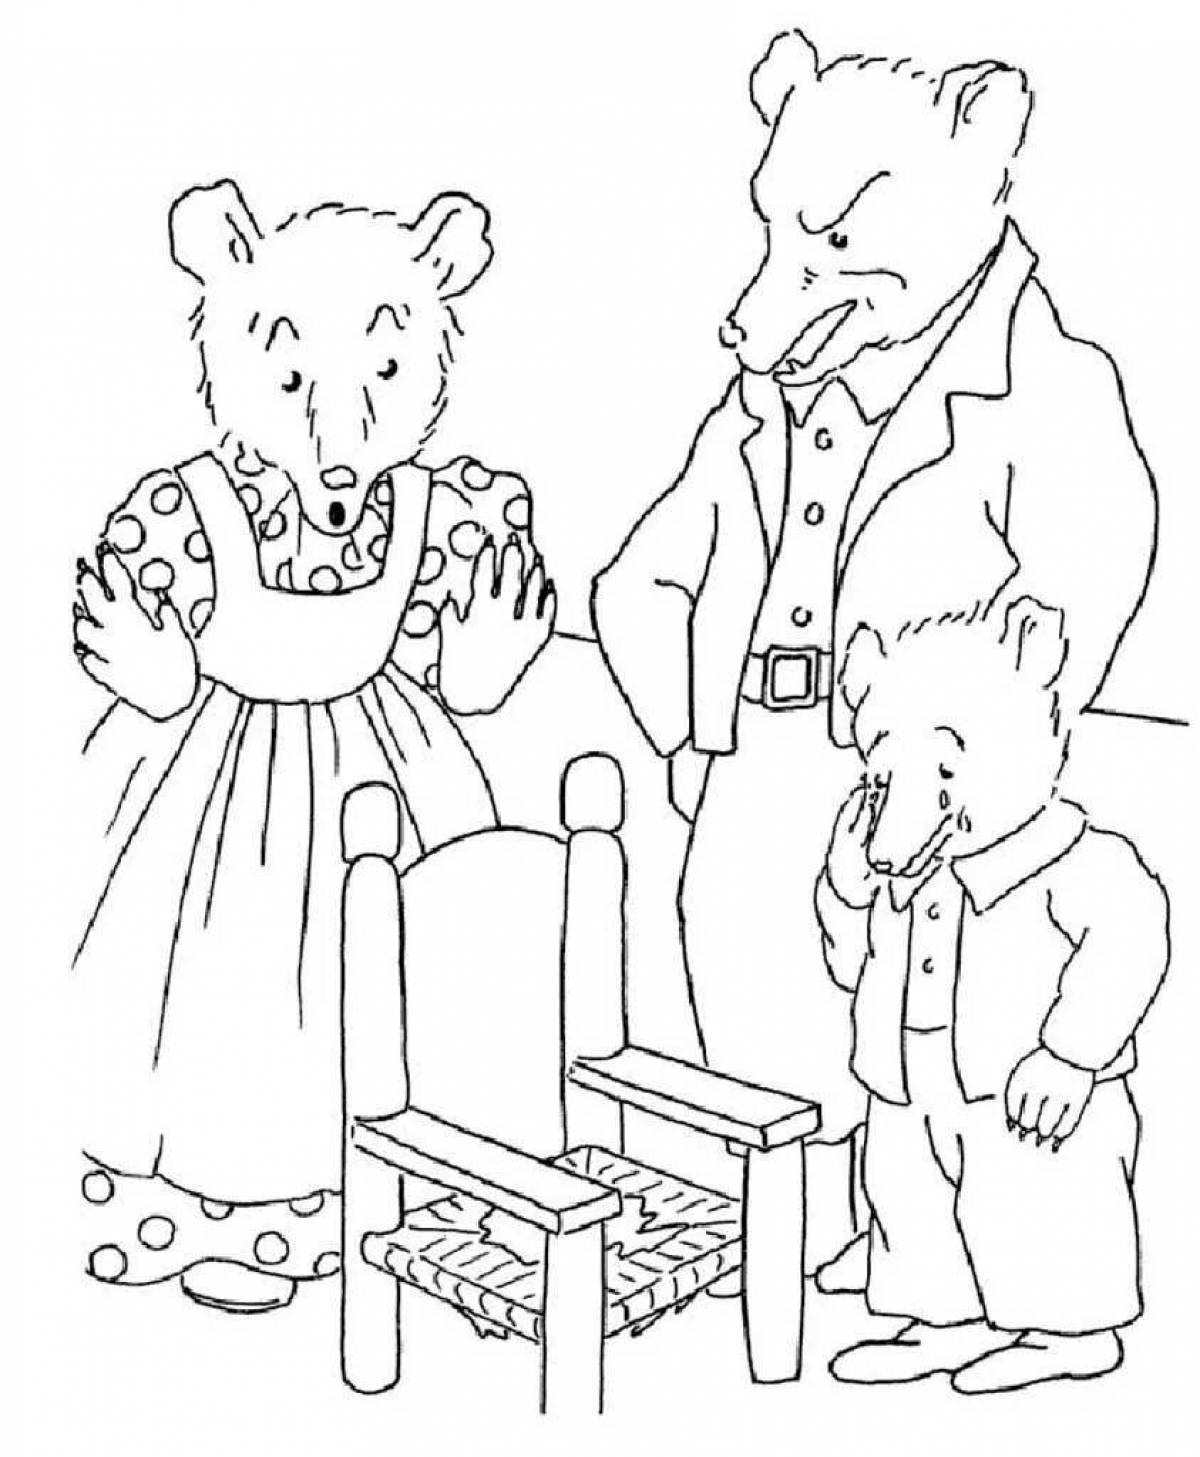 Outstanding coloring 3 bears for kids